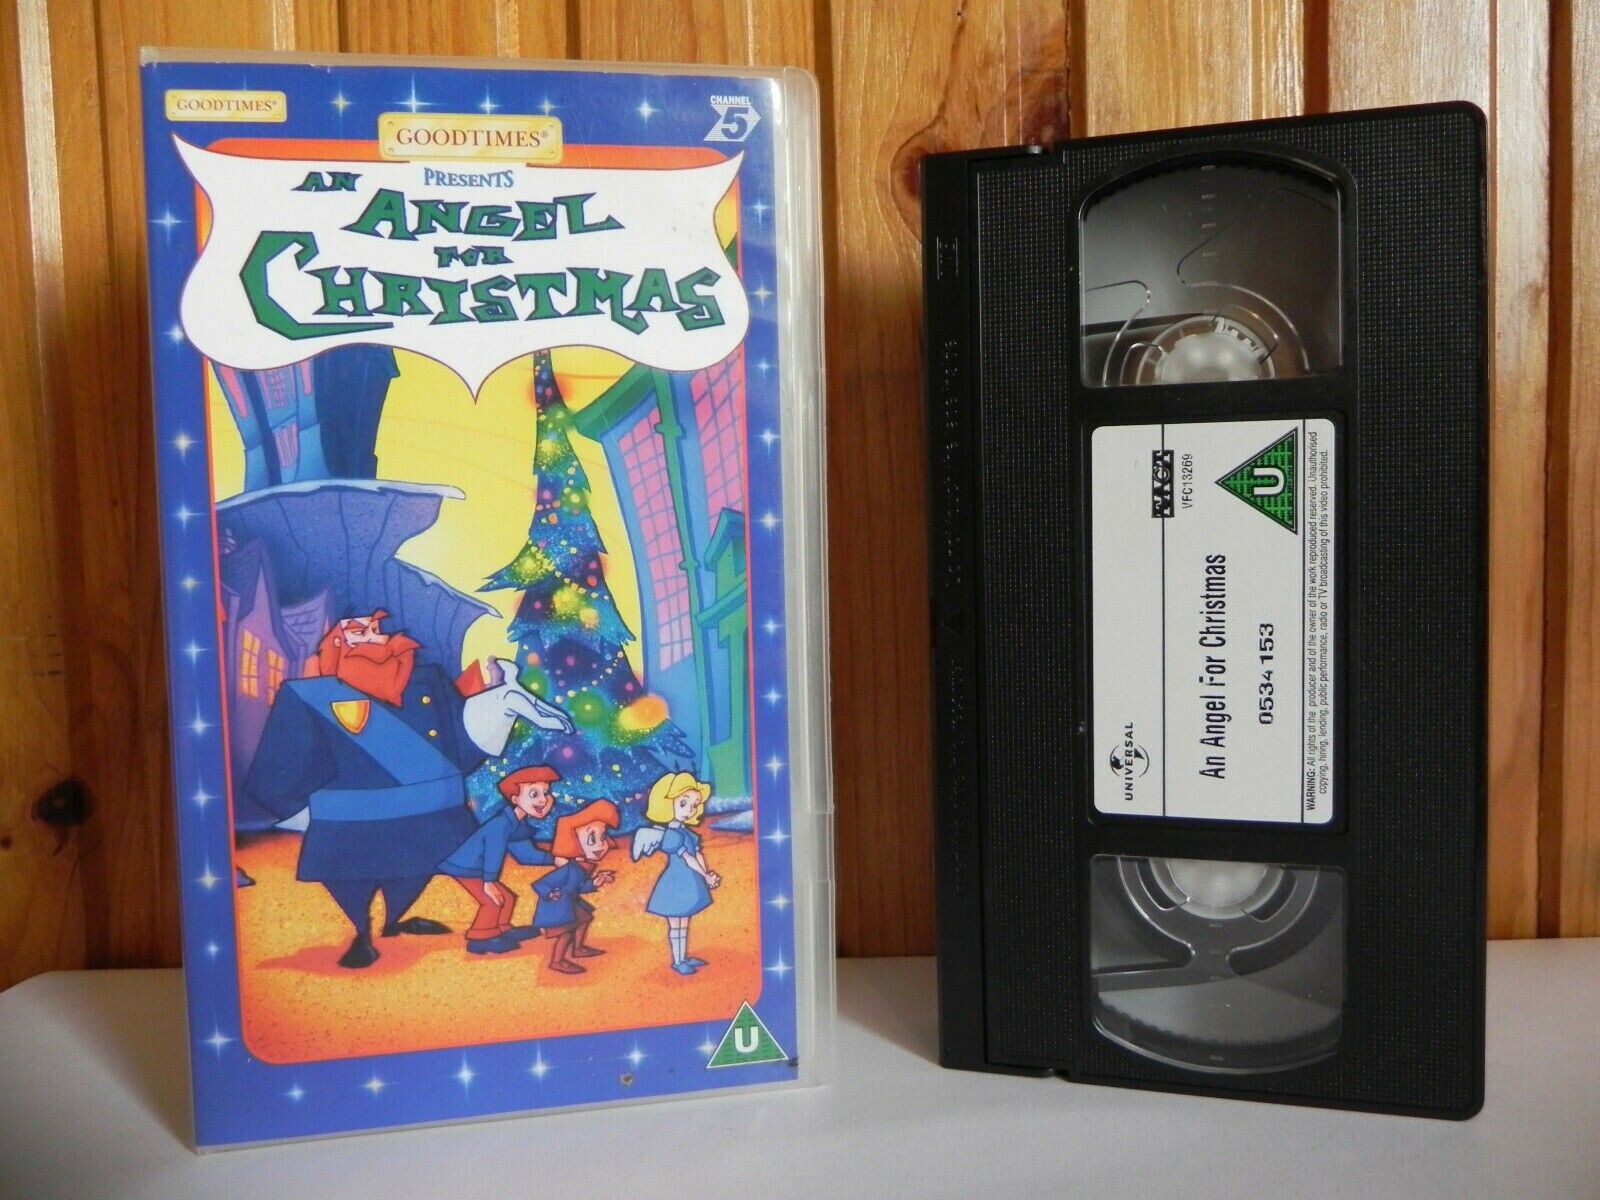 An Angel For Christmas: Charles Dickens (1843) - Animated Adaptation - Kid's VHS-